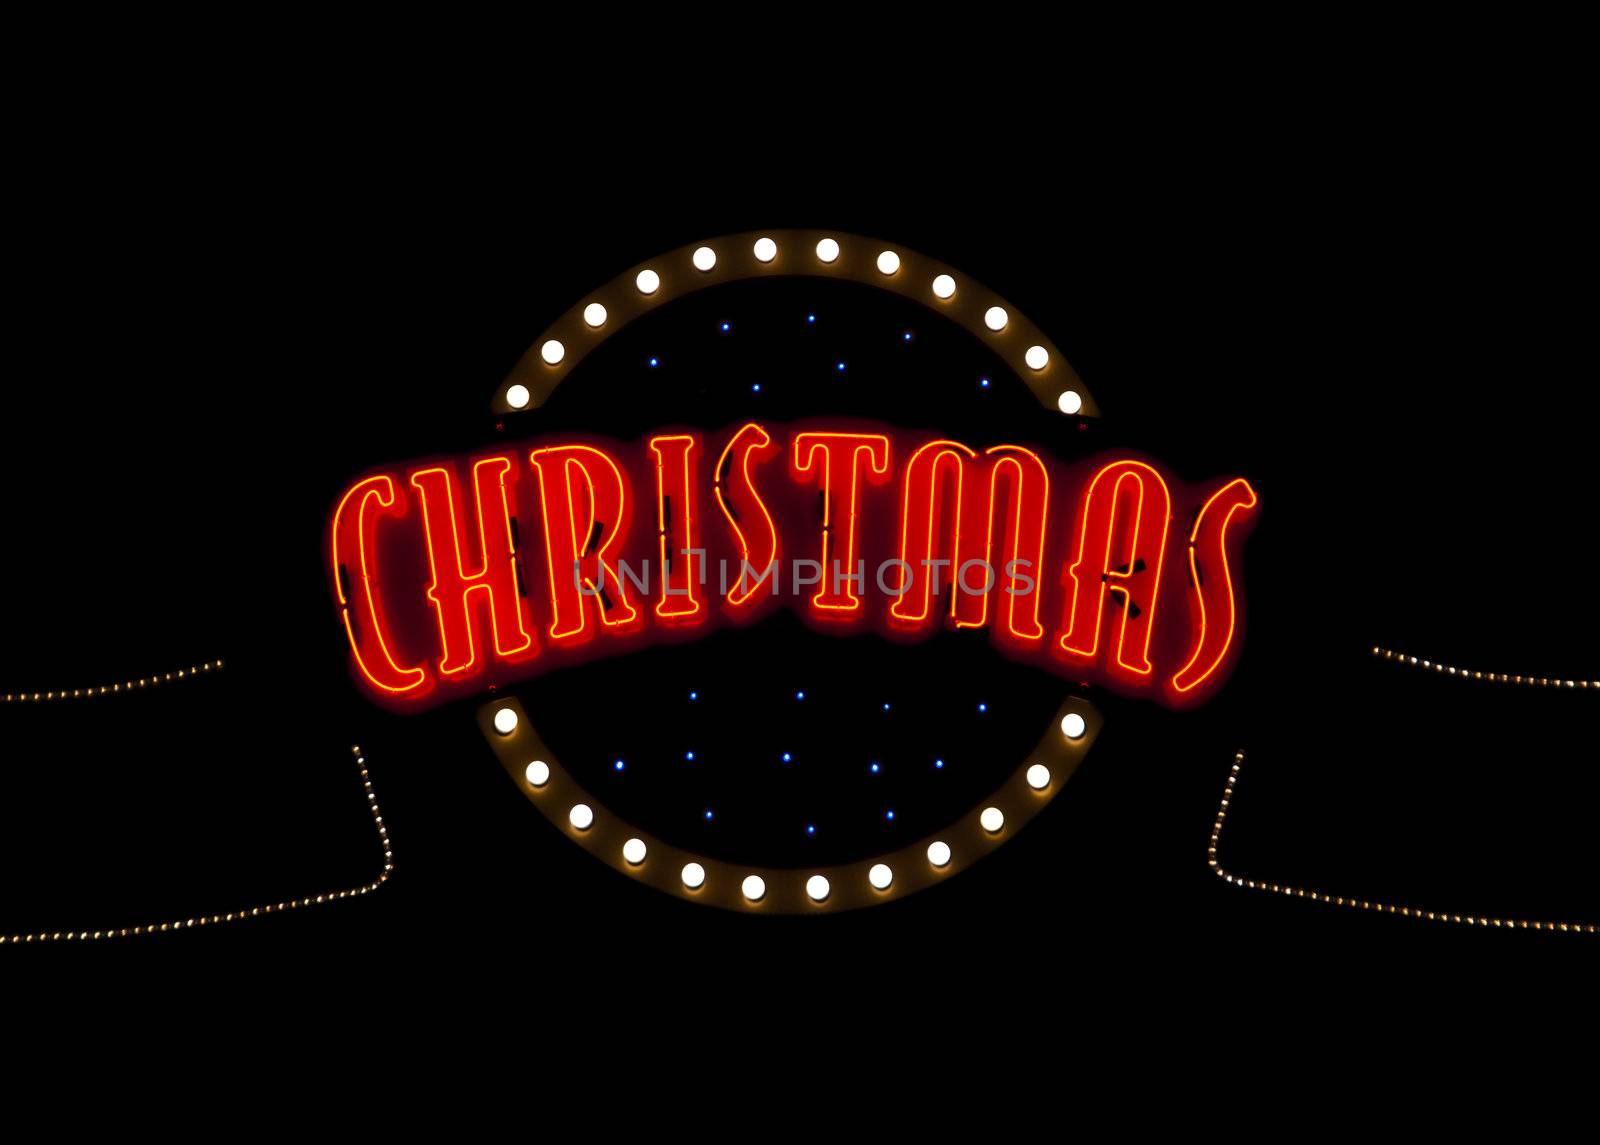 Christmas neon light sign in the night